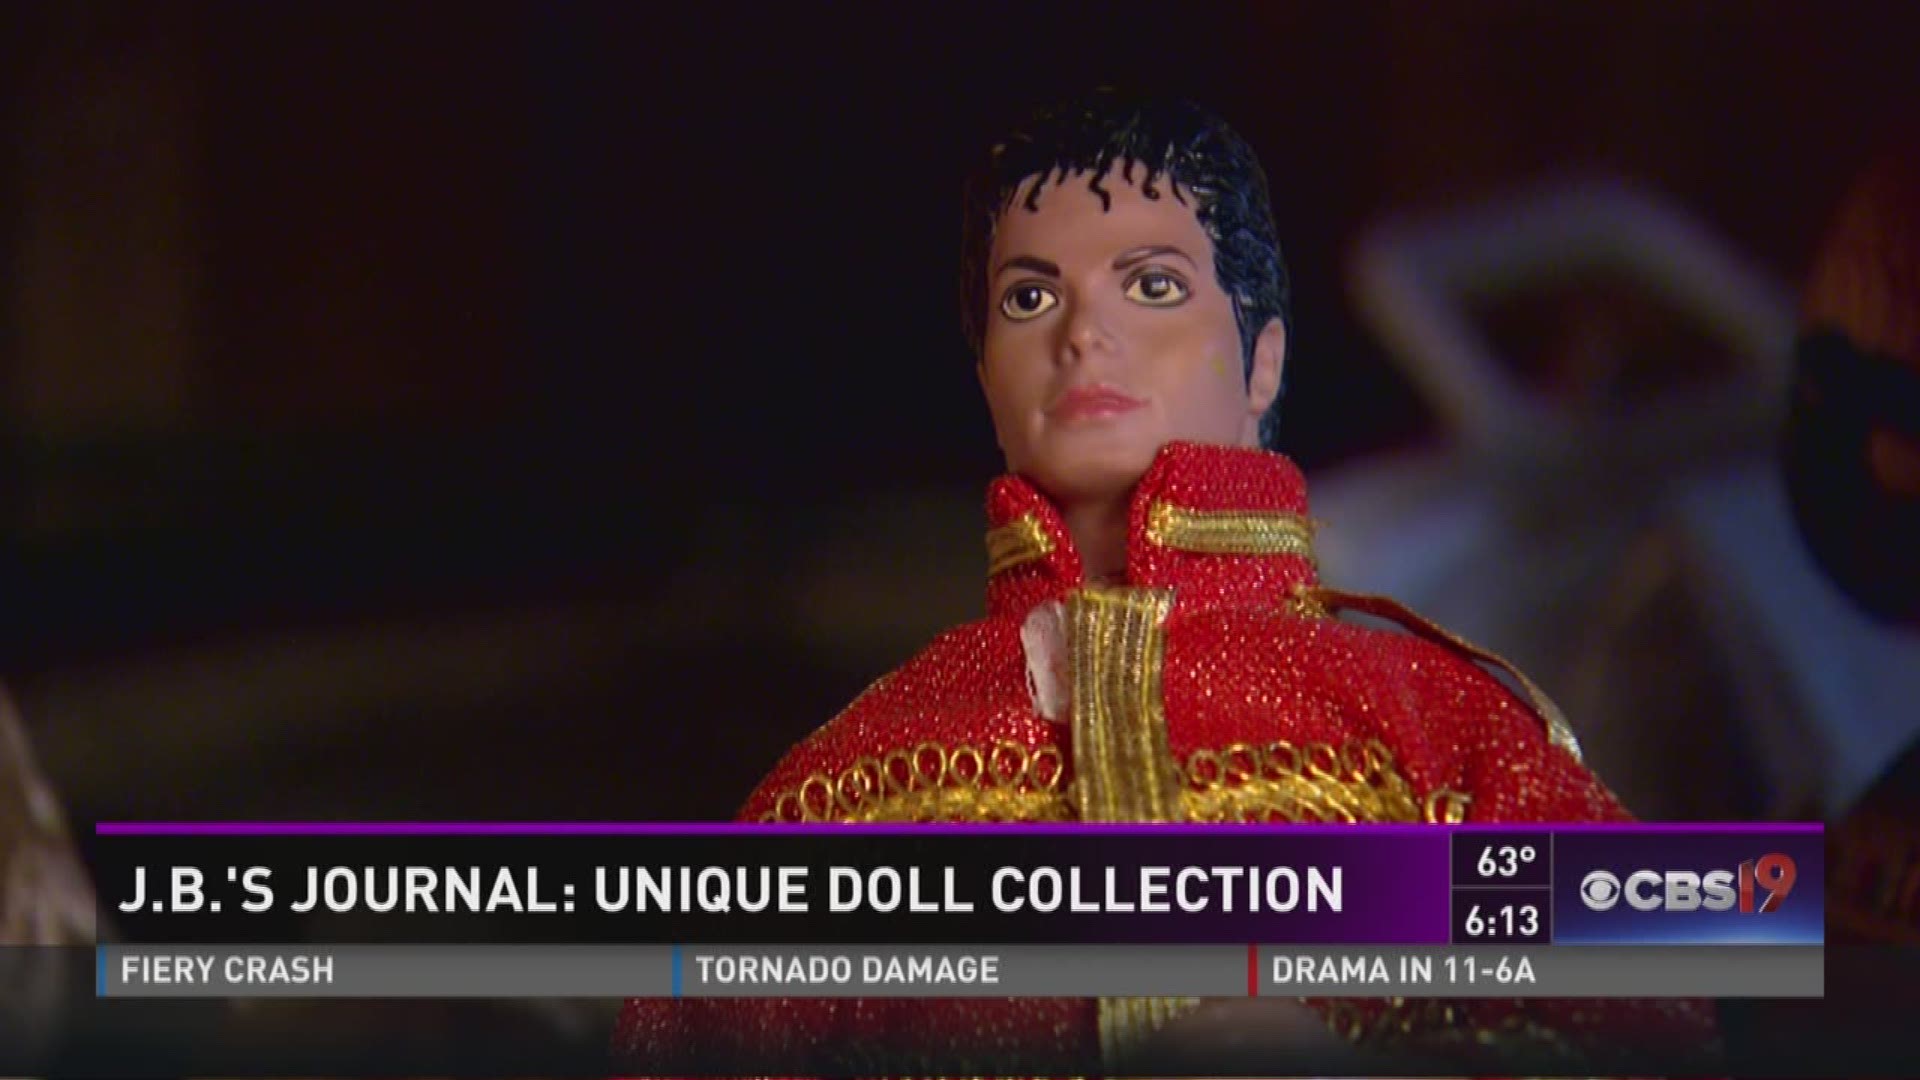 Dolls have been around since ancient times as a toy for children and later as a collector's item for adults. One East Texas woman has so many dolls she has run out of room to display them.